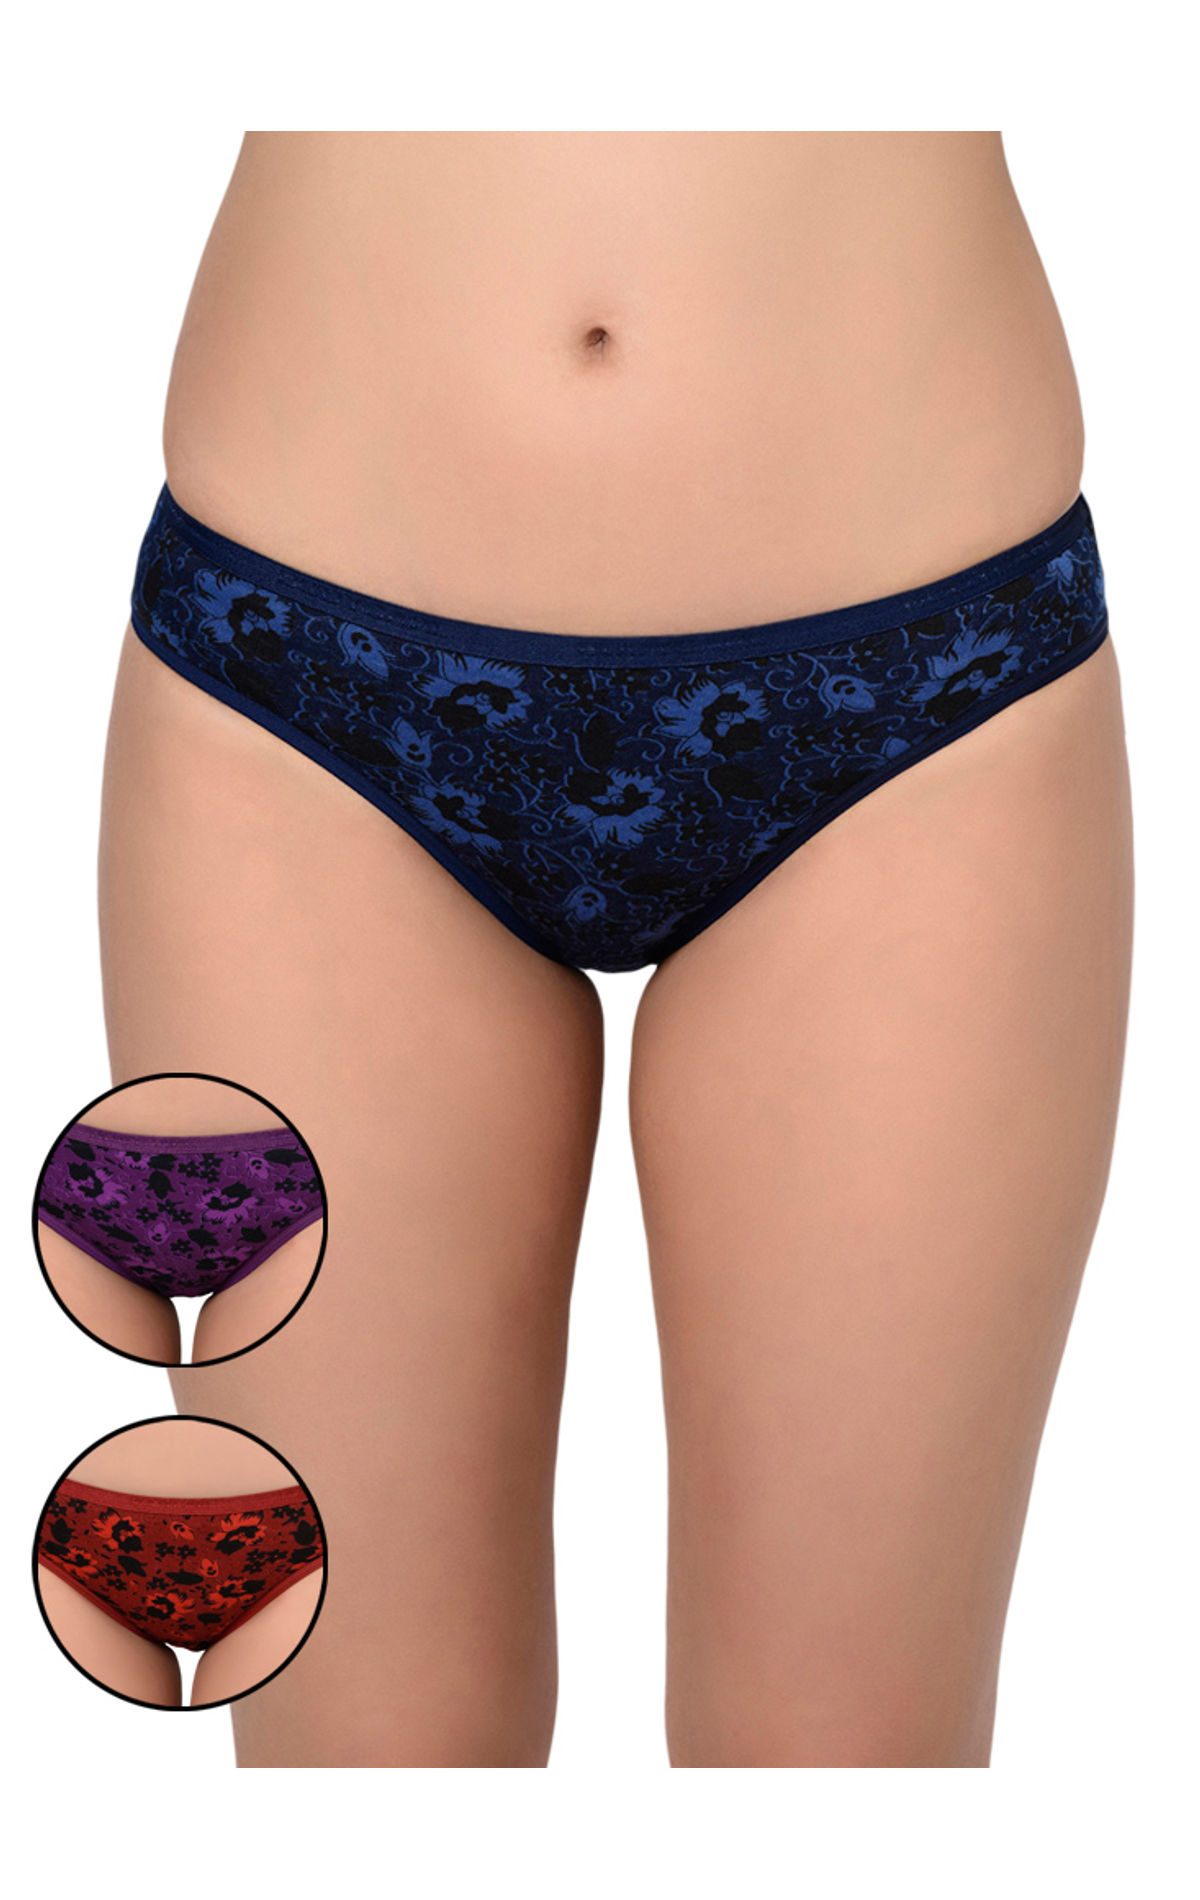 Bodycare Pack Of 3 Printed Panty In Assorted Colors-8533b-3pcs